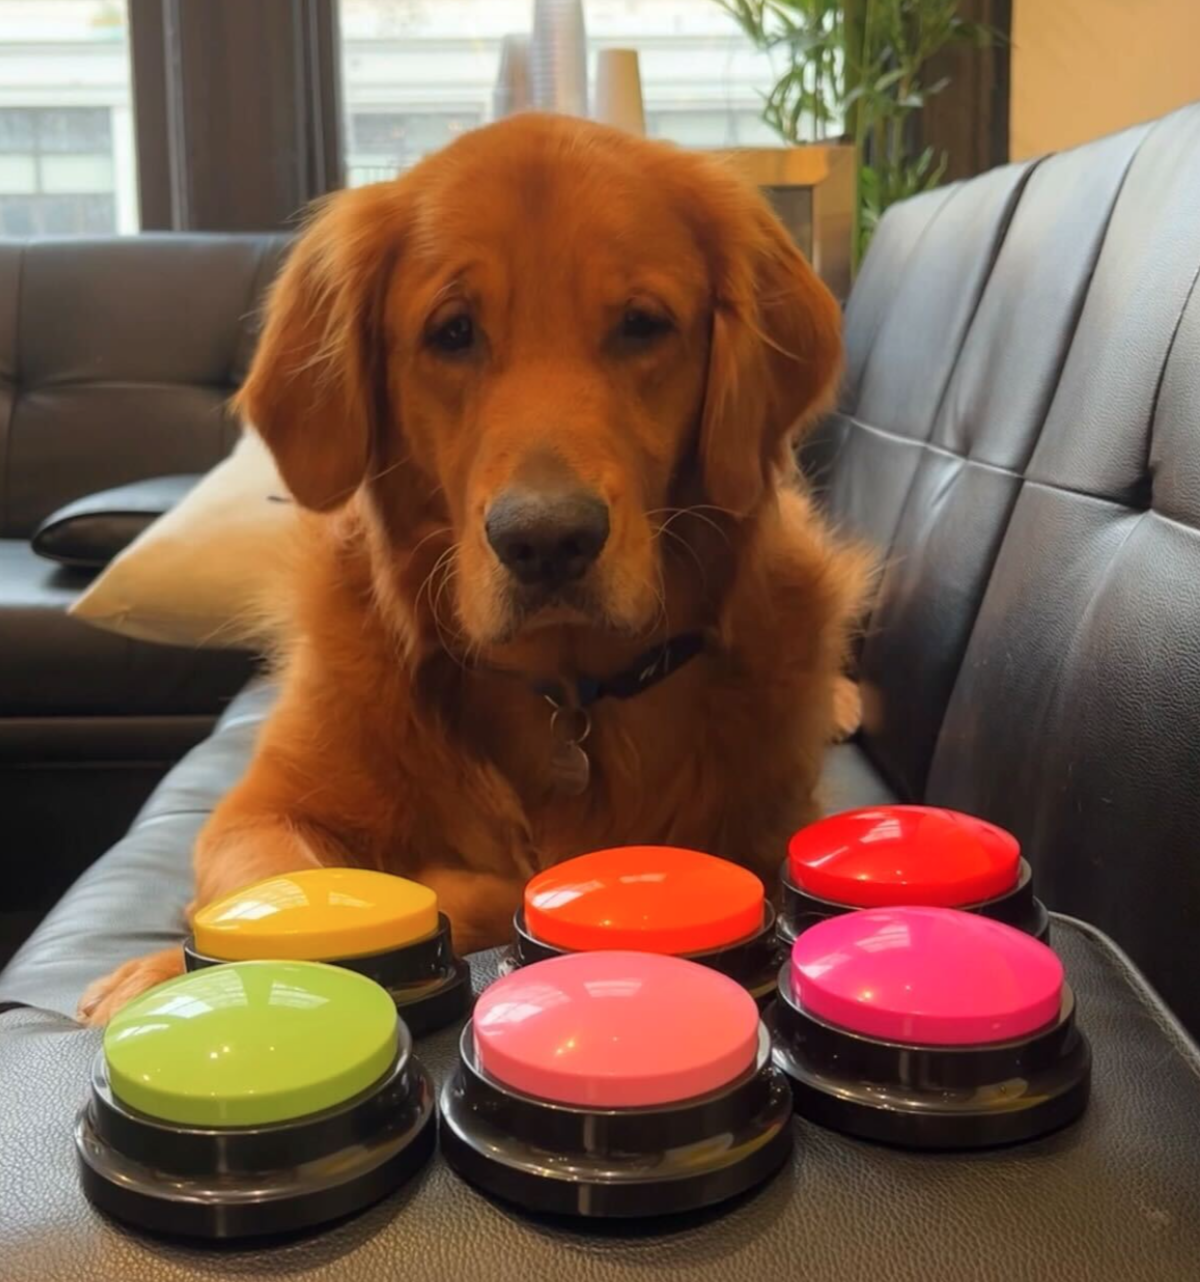 Using Buttons to Train Your Dog to Talk